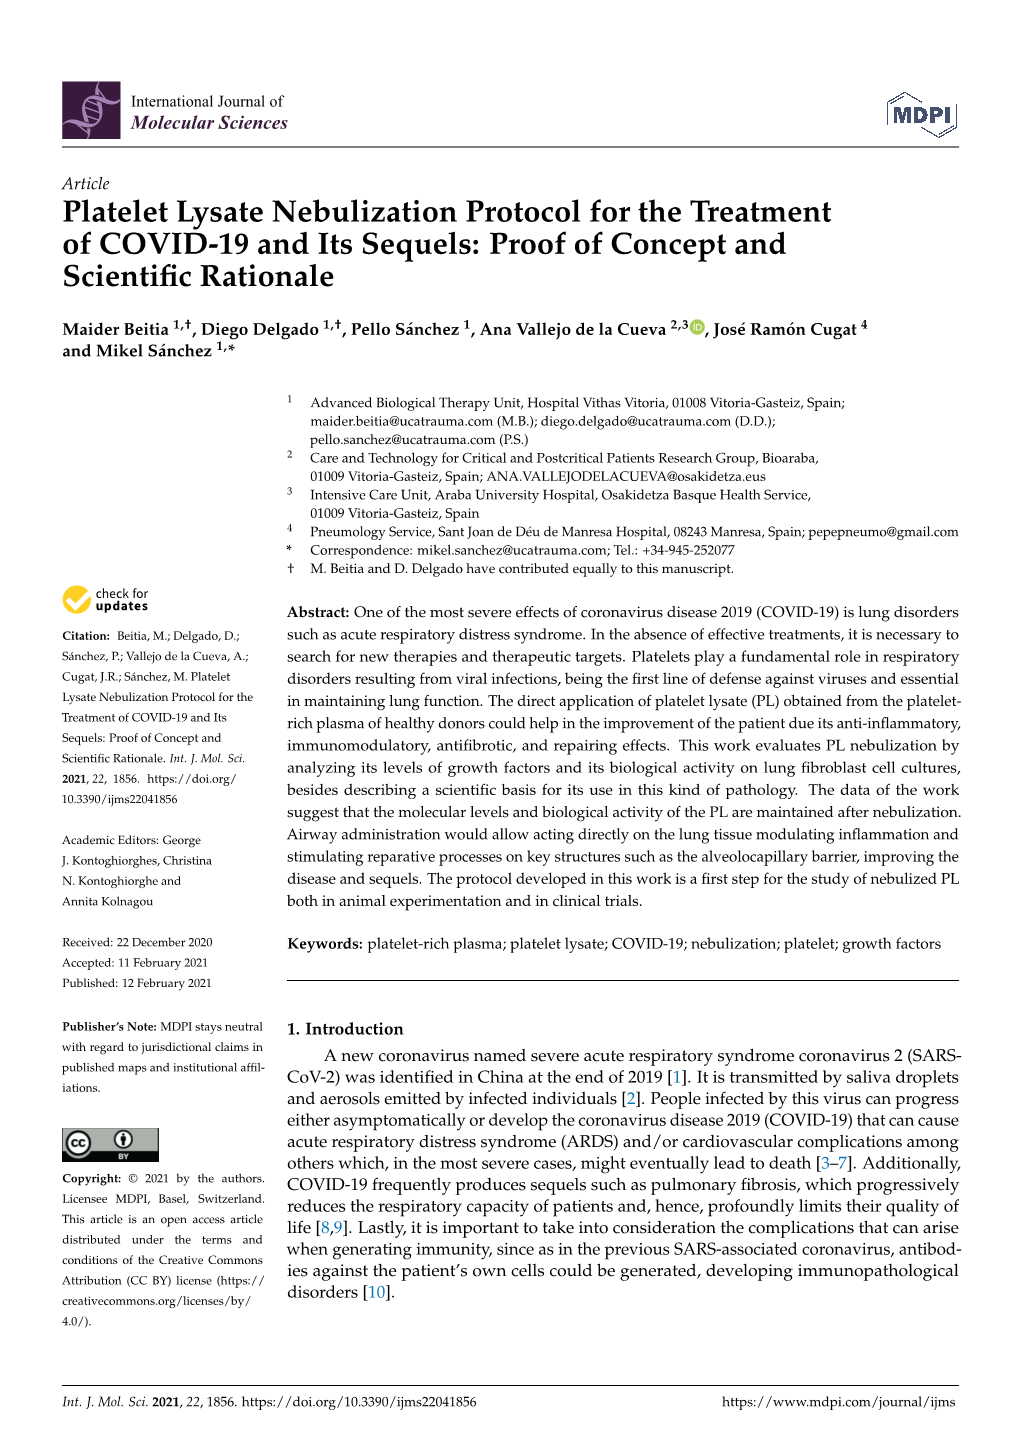 Platelet Lysate Nebulization Protocol for the Treatment of COVID-19 and Its Sequels: Proof of Concept and Scientific Rationale